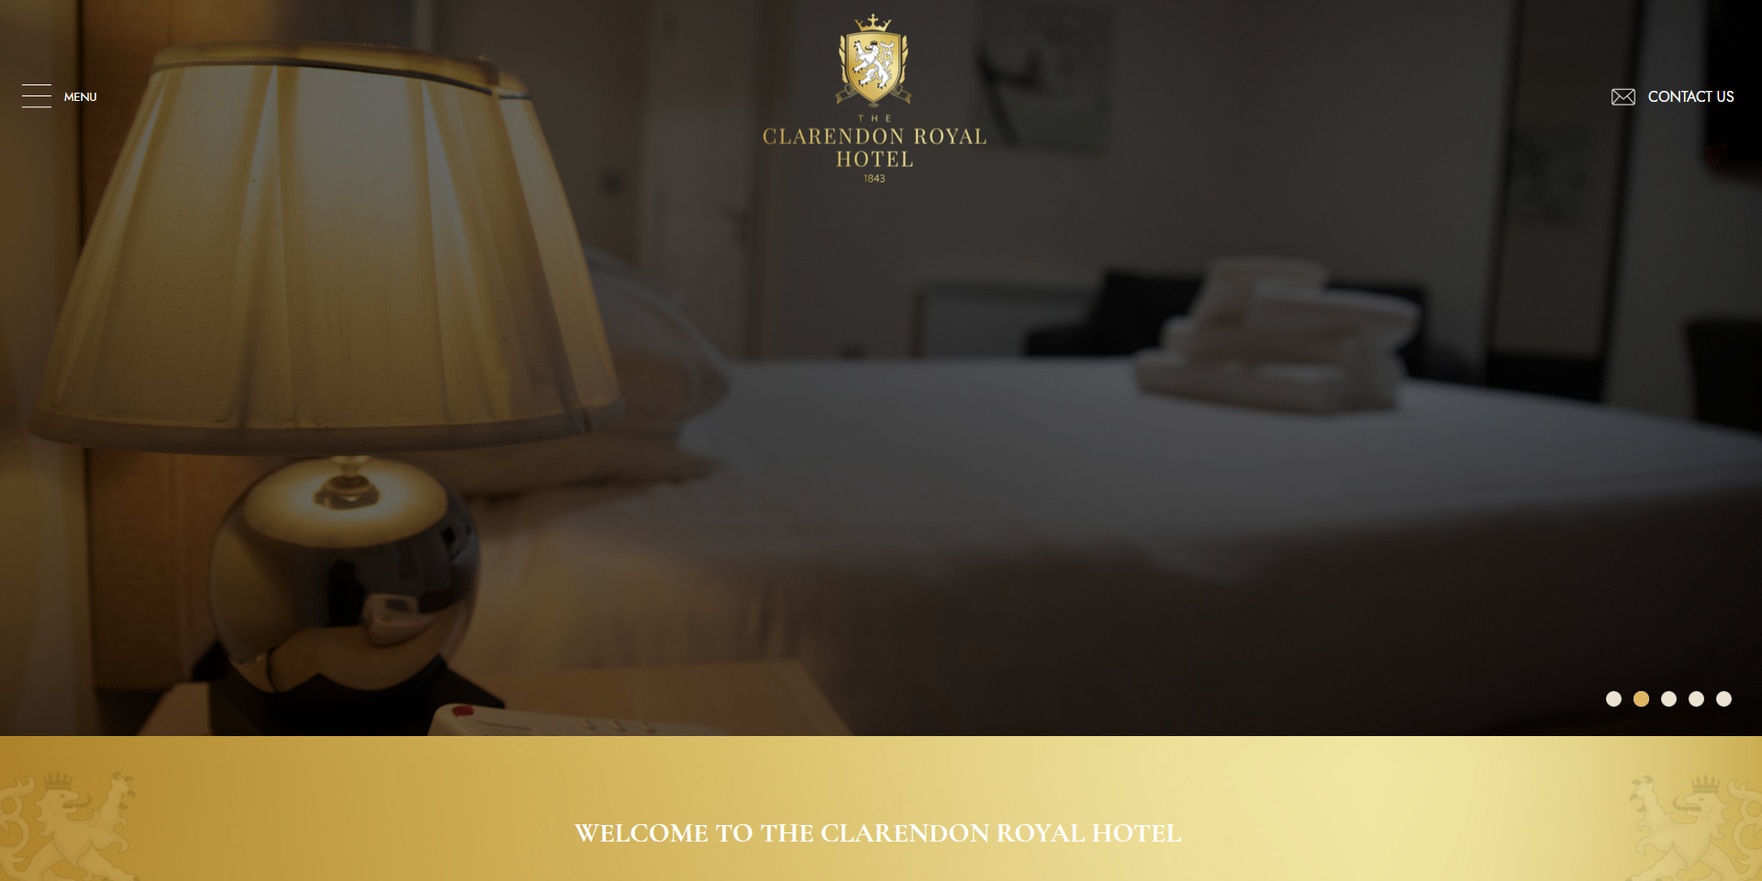 The new Clarendon Royal Hotel website, designed by it'seeze, shown on a desktop.